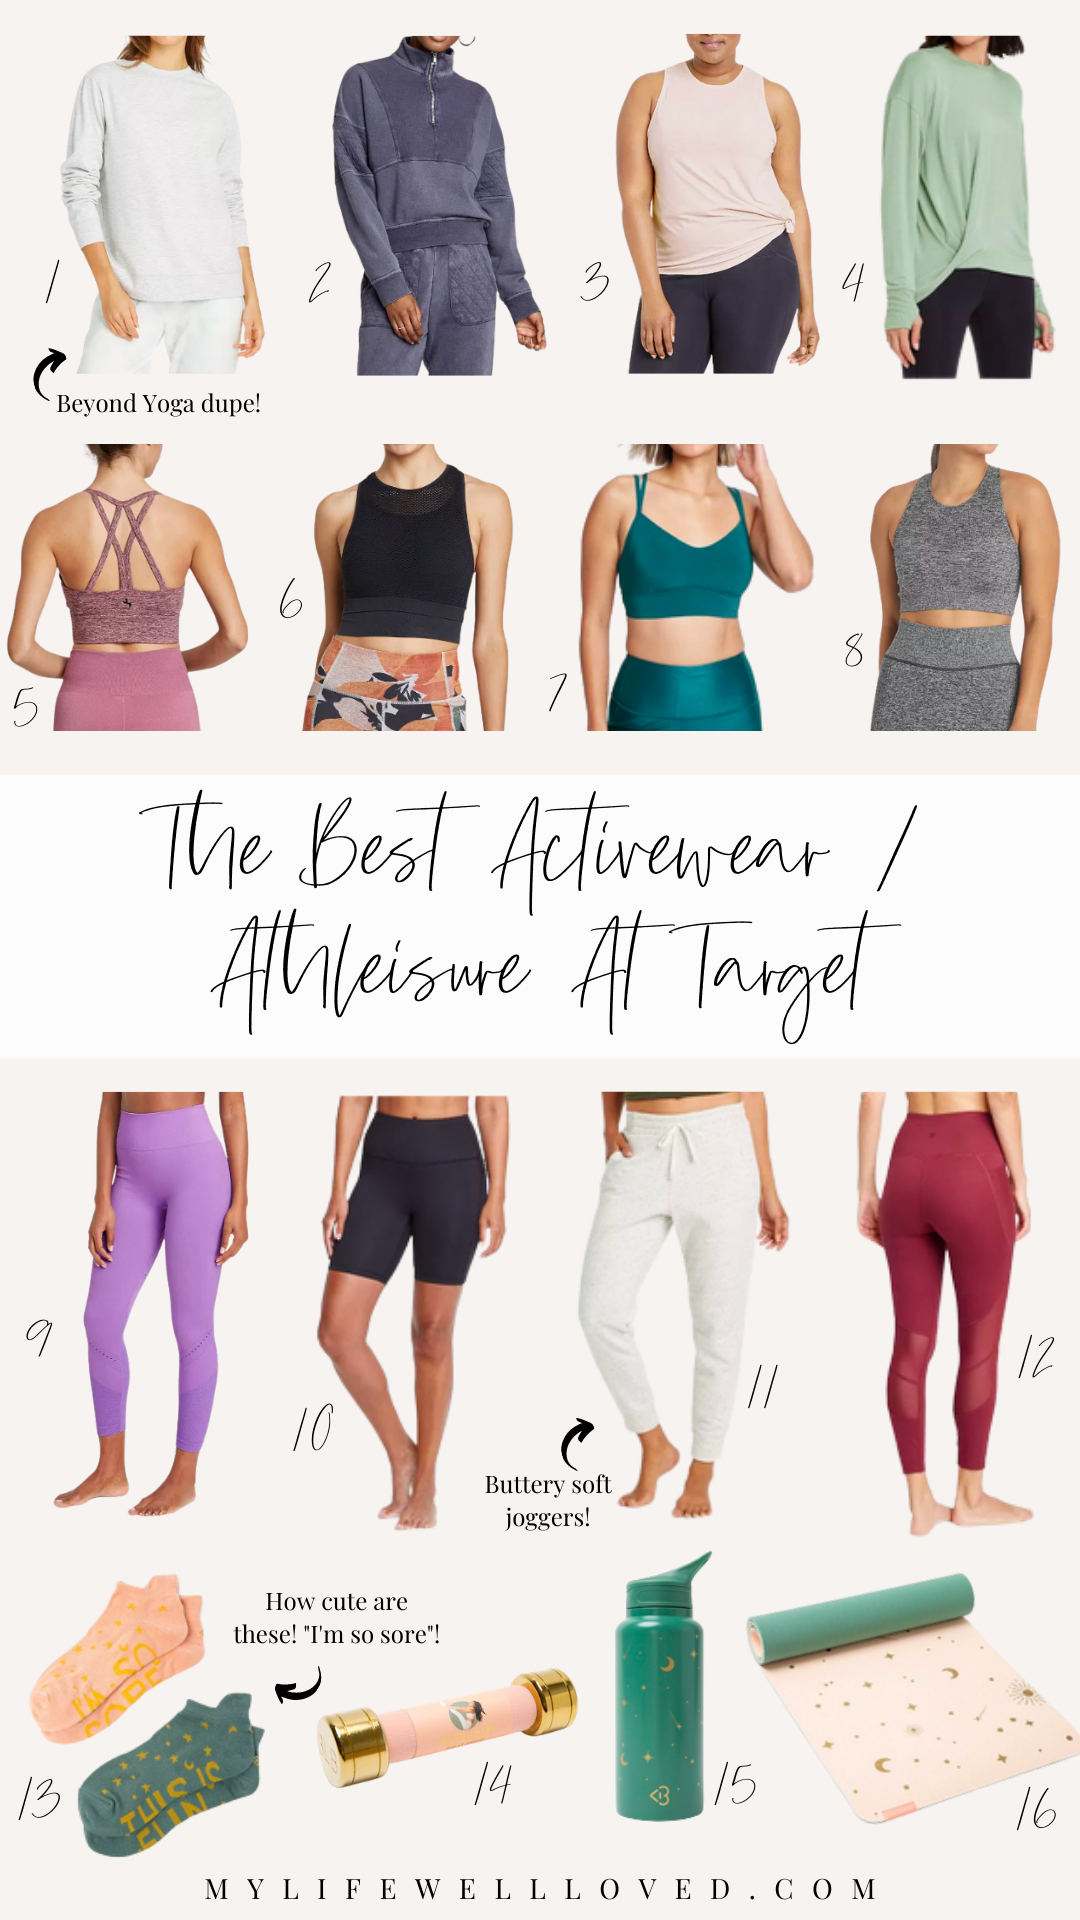 Women's Activewear & Athleisure Clothing